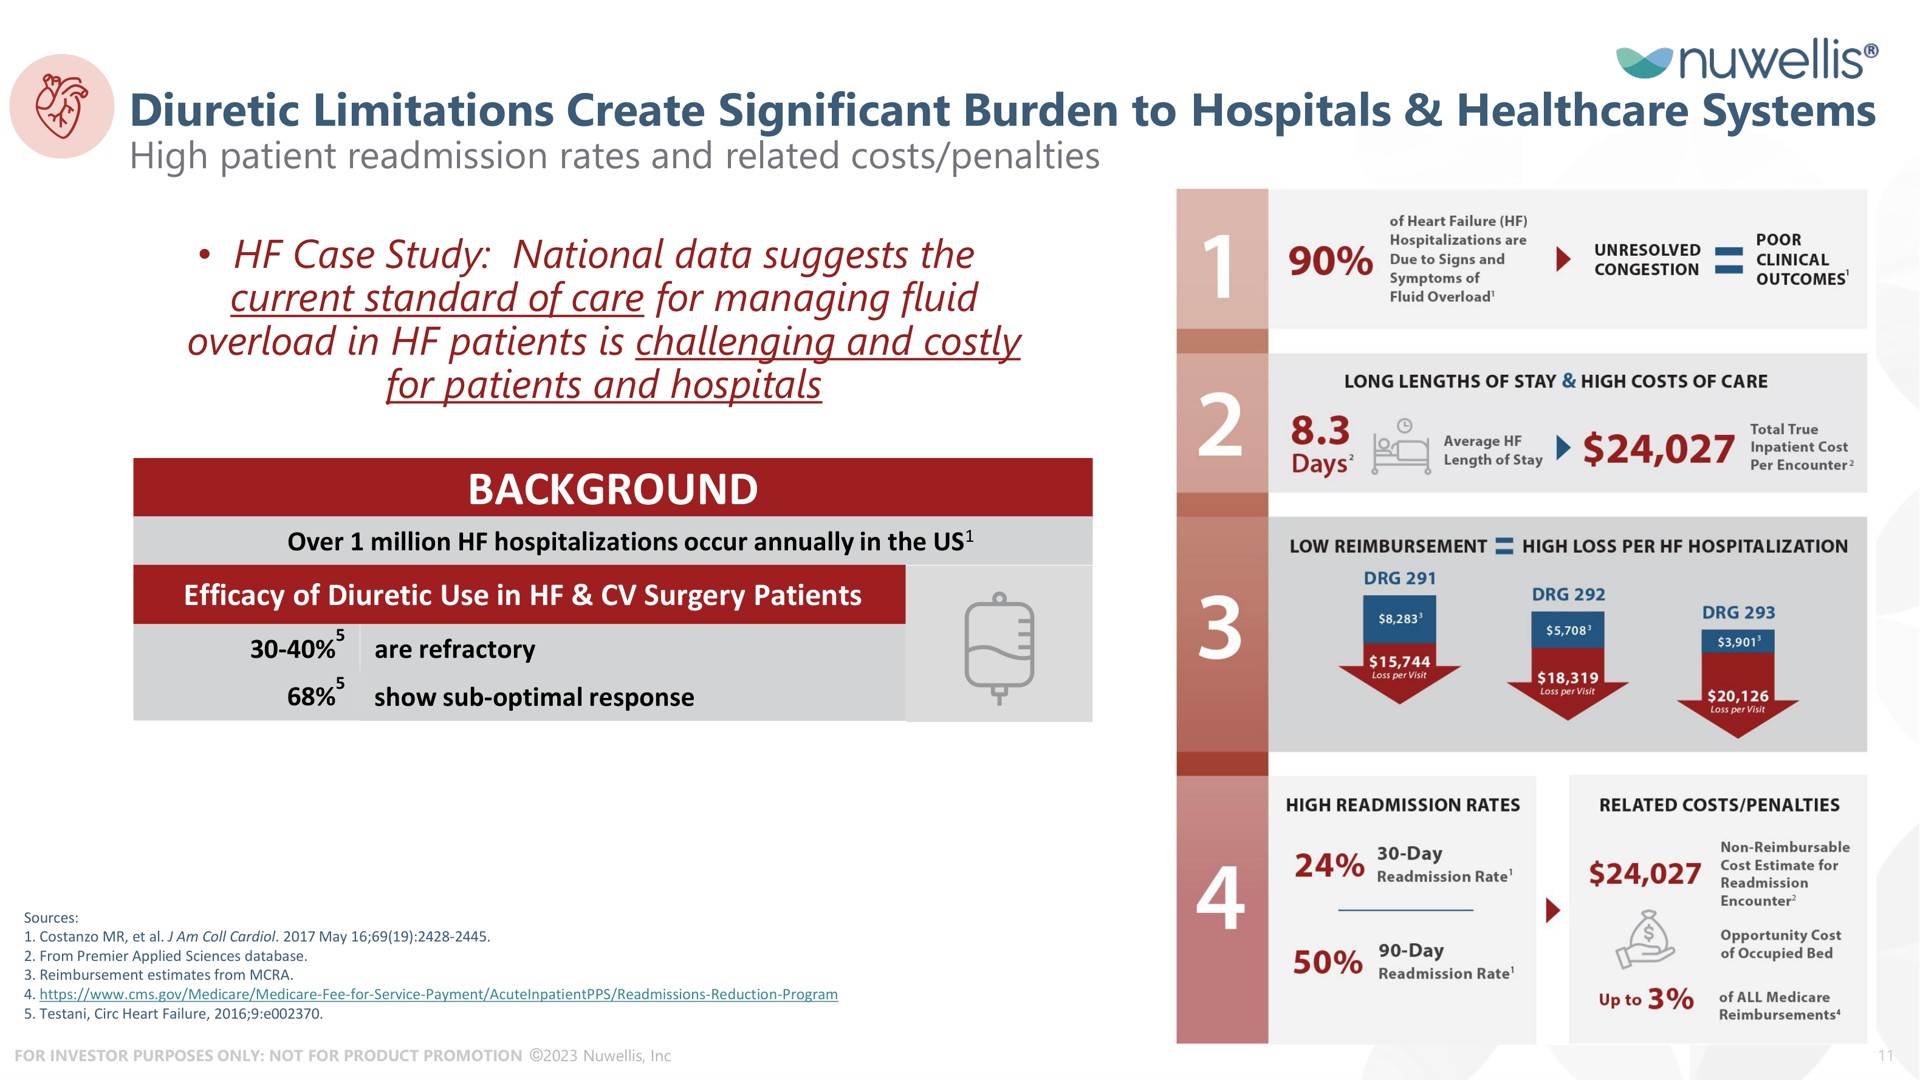 diuretic limitations create significant burden to hospitals systems background | Nuwellis